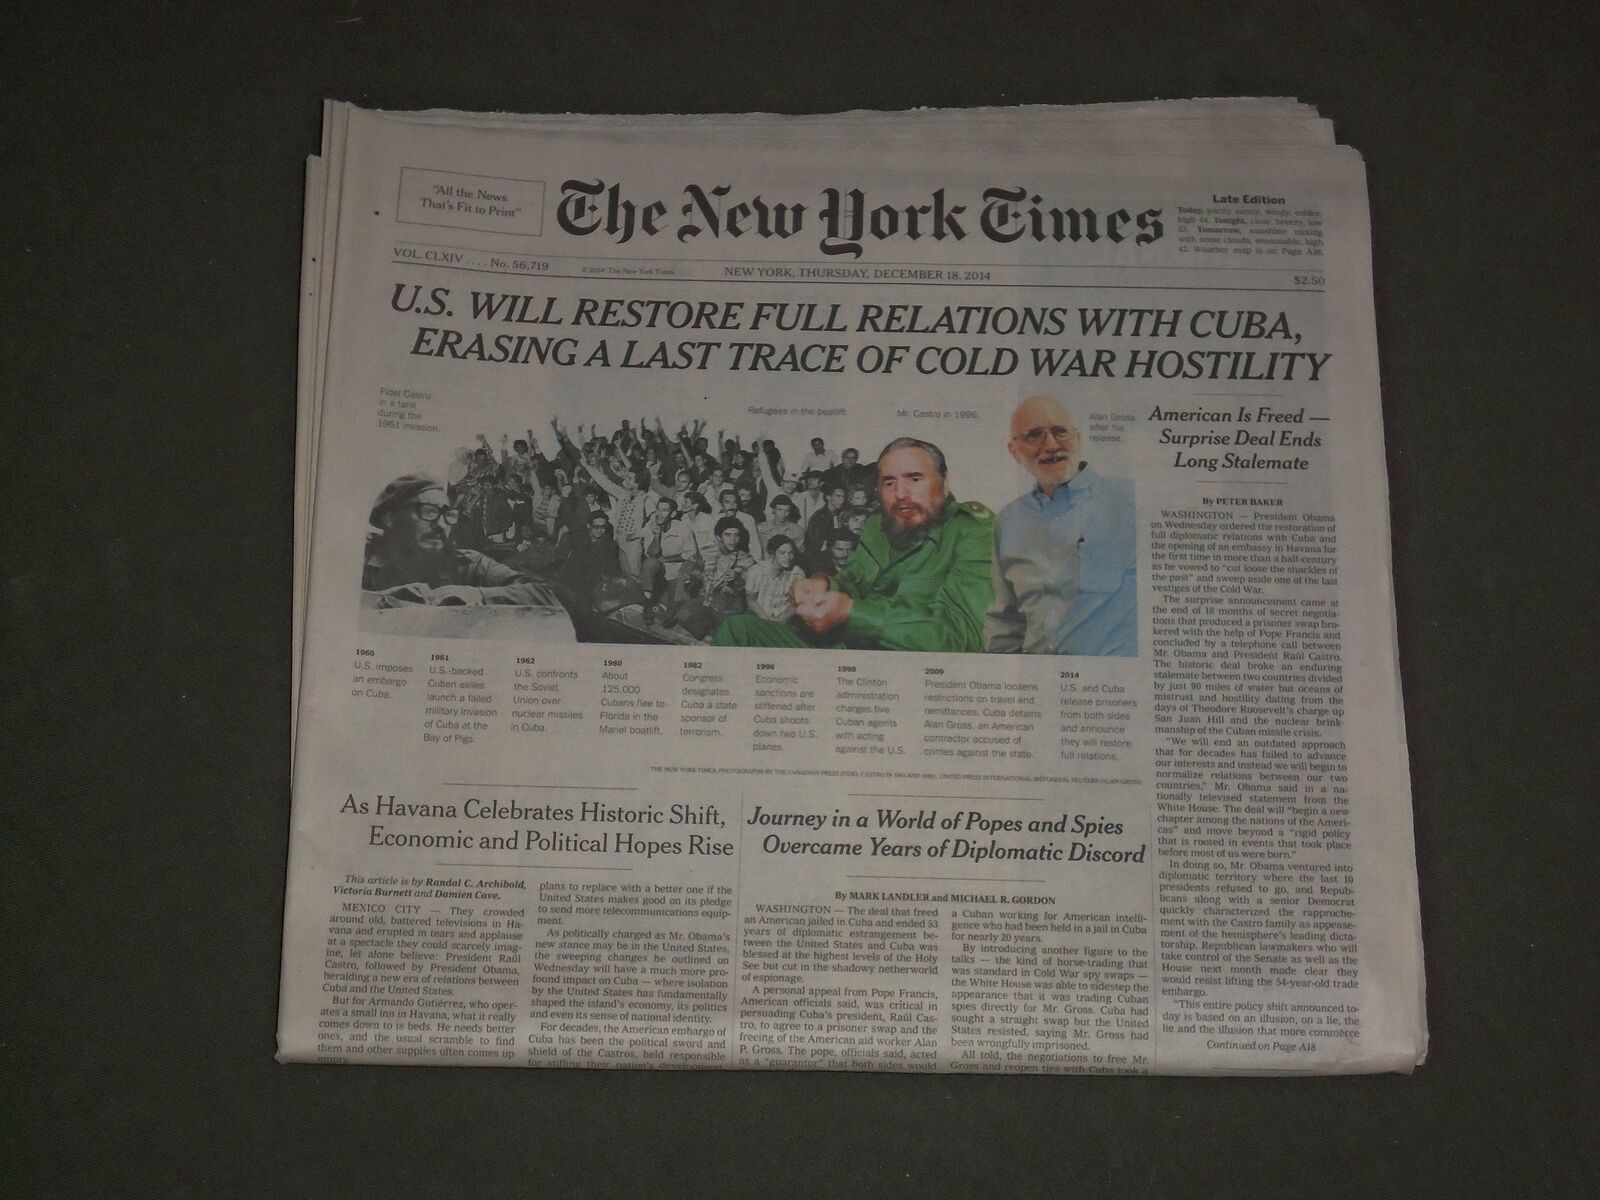 2014 DECEMBER 18 NEW YORK TIMES - U.S. WILL RESTORE FULL RELATIONS WITH CUBA